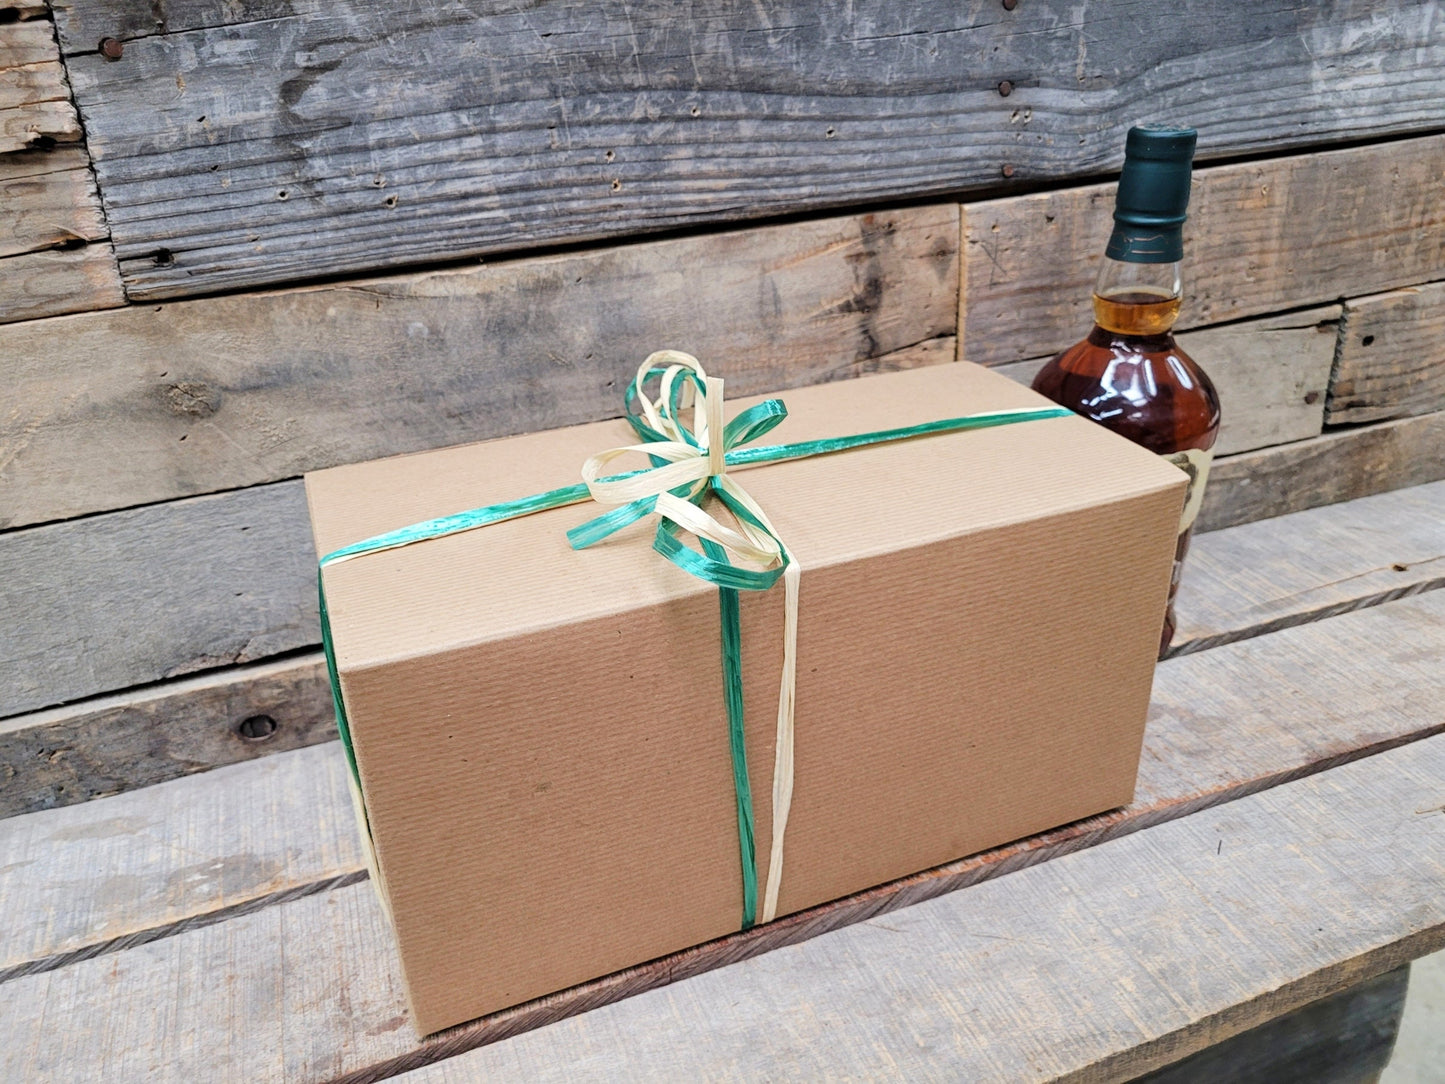 SALE! Wine Barrel Chunks - BBQ Box from Napa wine barrels - Gift Packaged. 100% Recycled!